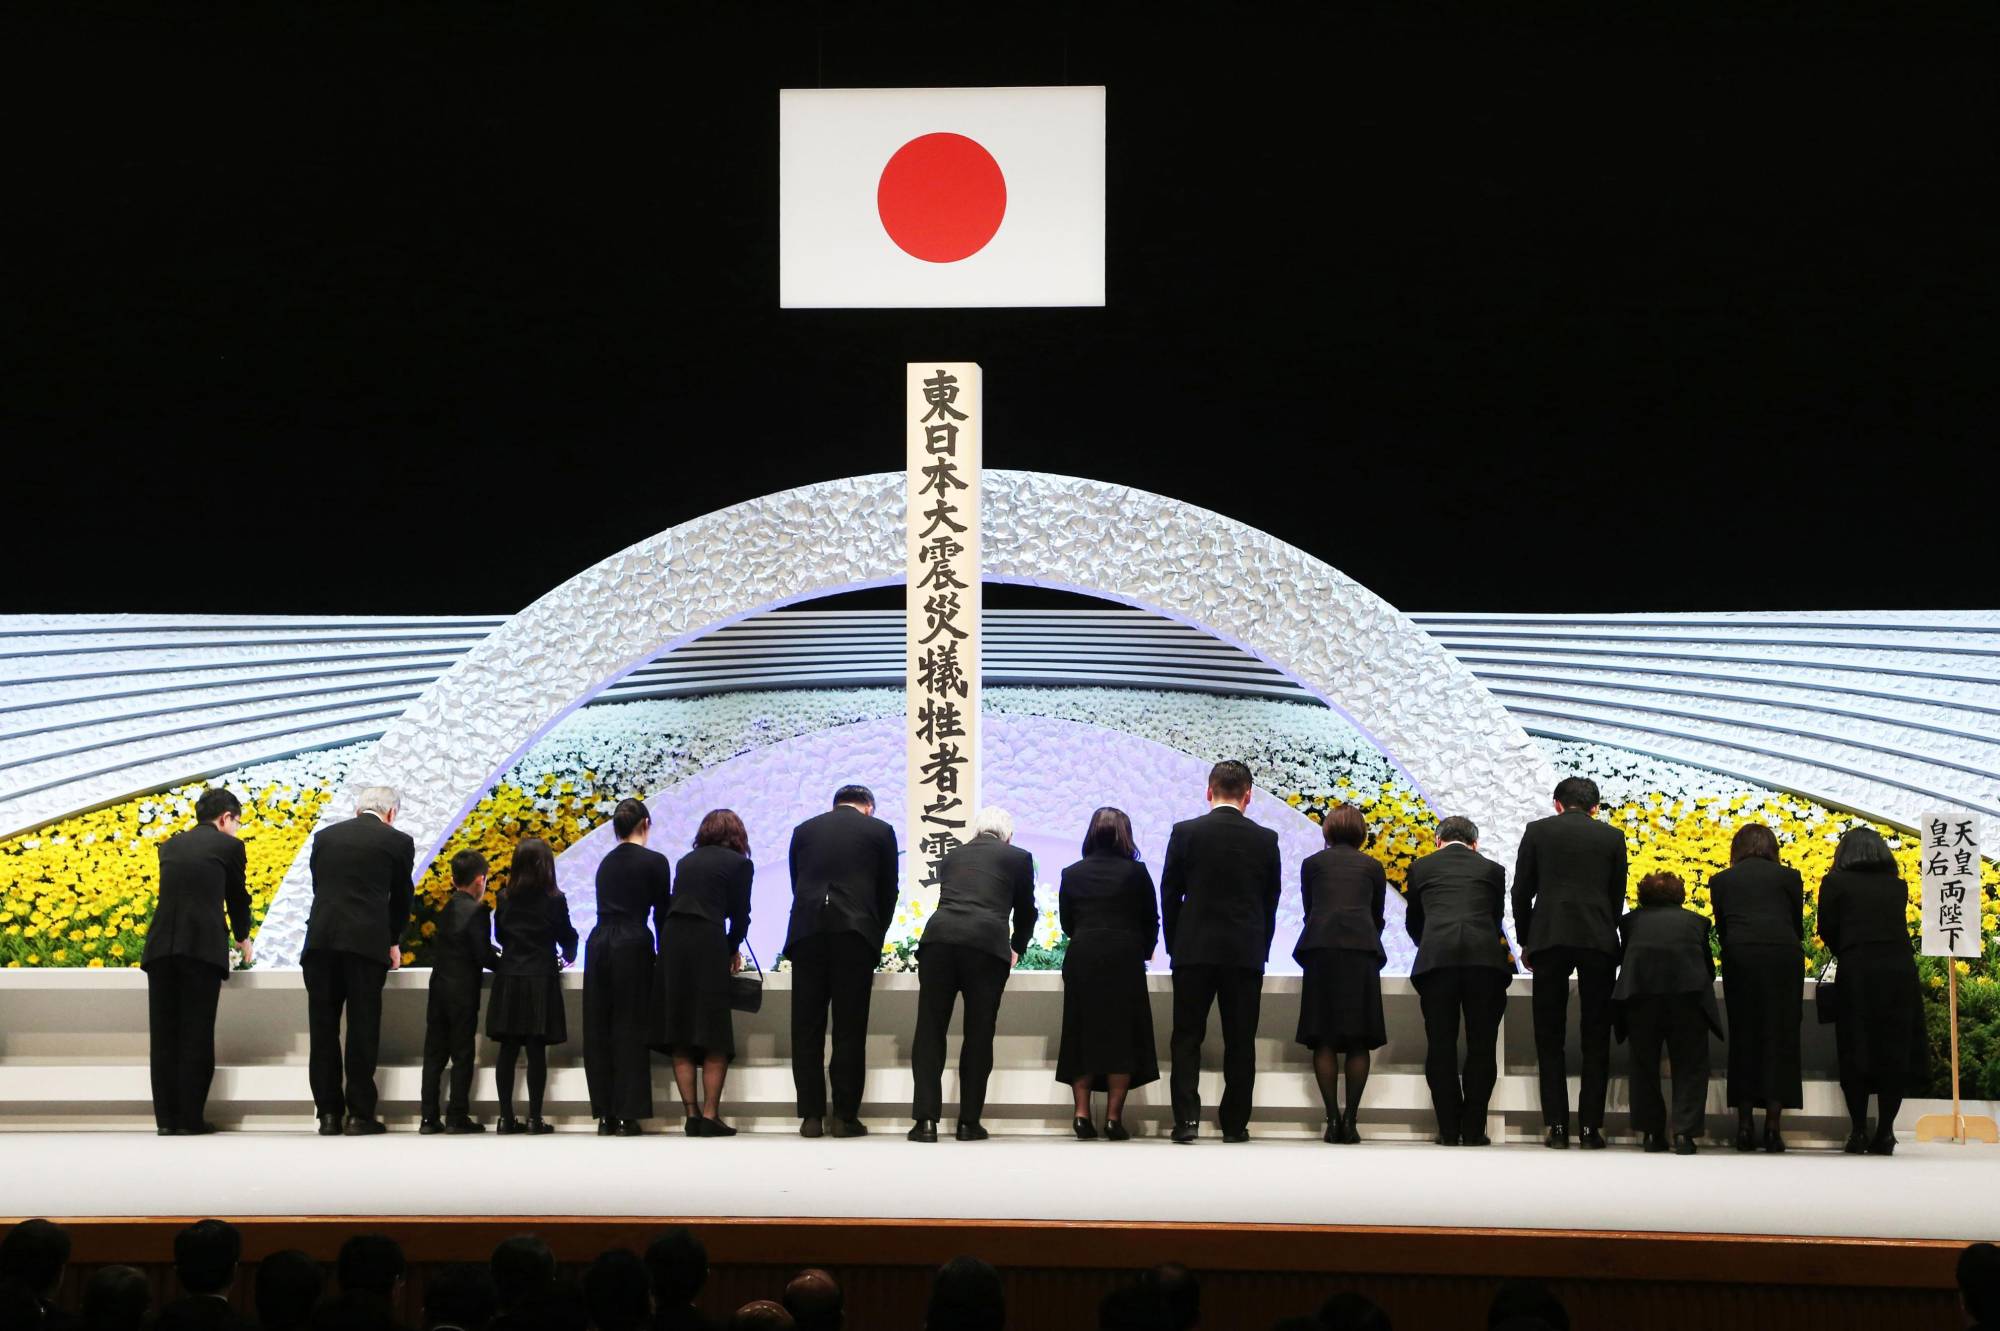 A memorial service for the 2011 earthquake and tsunami in northeastern Japan was held on March 11, 2019, in Tokyo. The government will hold one this year, after skipping it last year due to the coronavirus pandemic. | KYODO